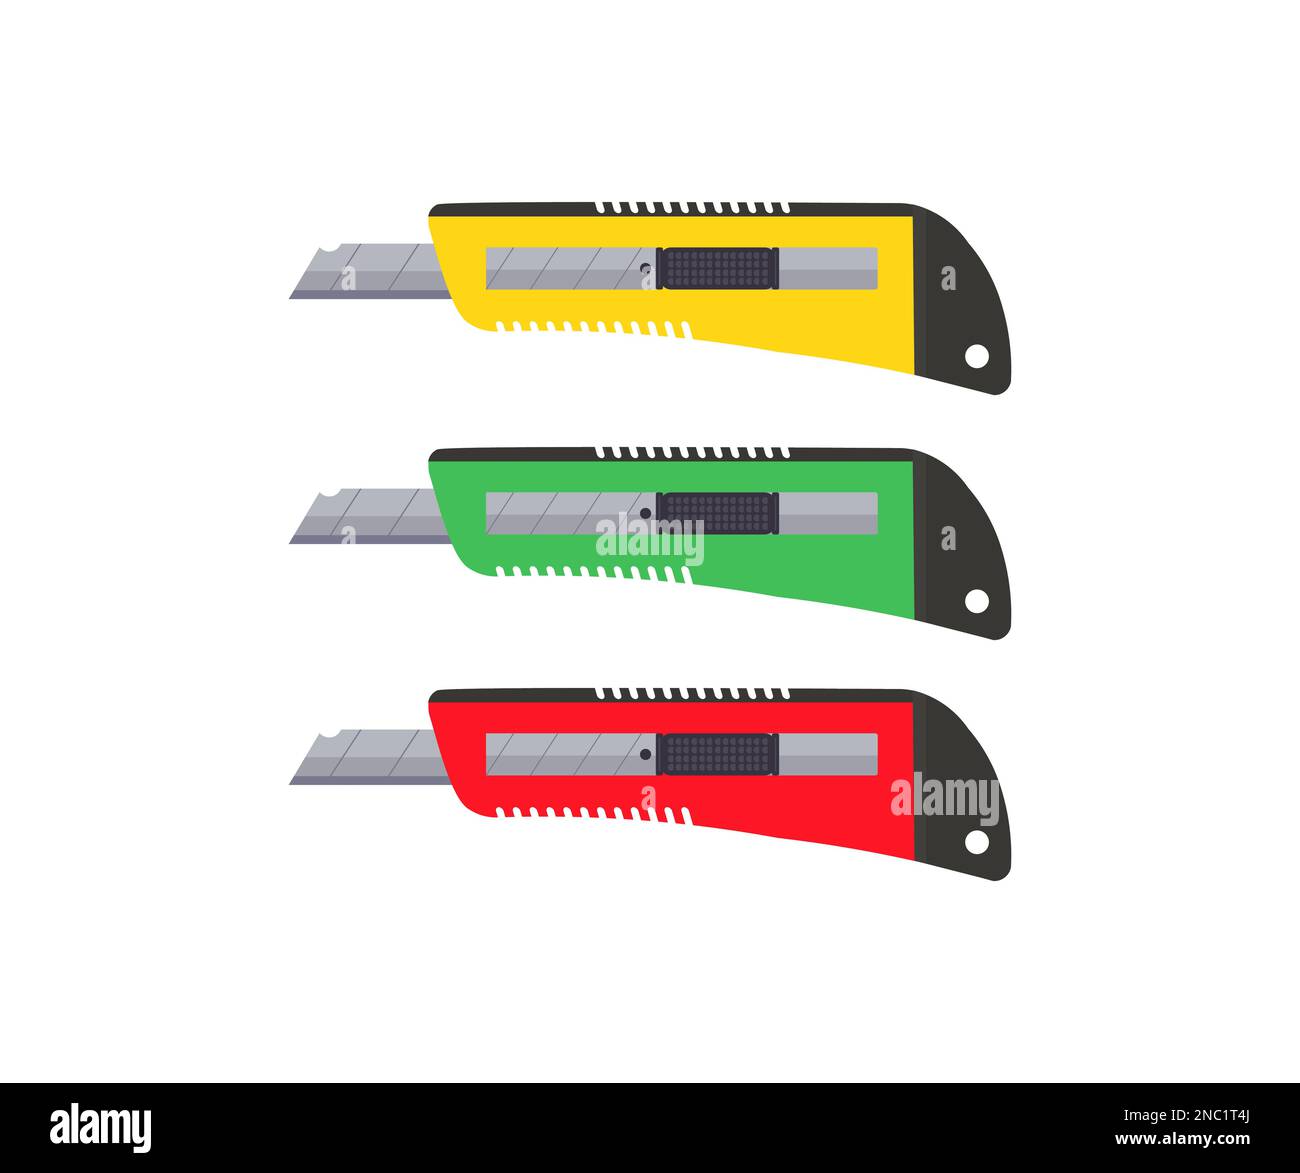 Stationery knife yellow, green, red. Icon for paper cutting, box cutter knife, office supplies logo design. The stationery knife isolated. Stock Vector